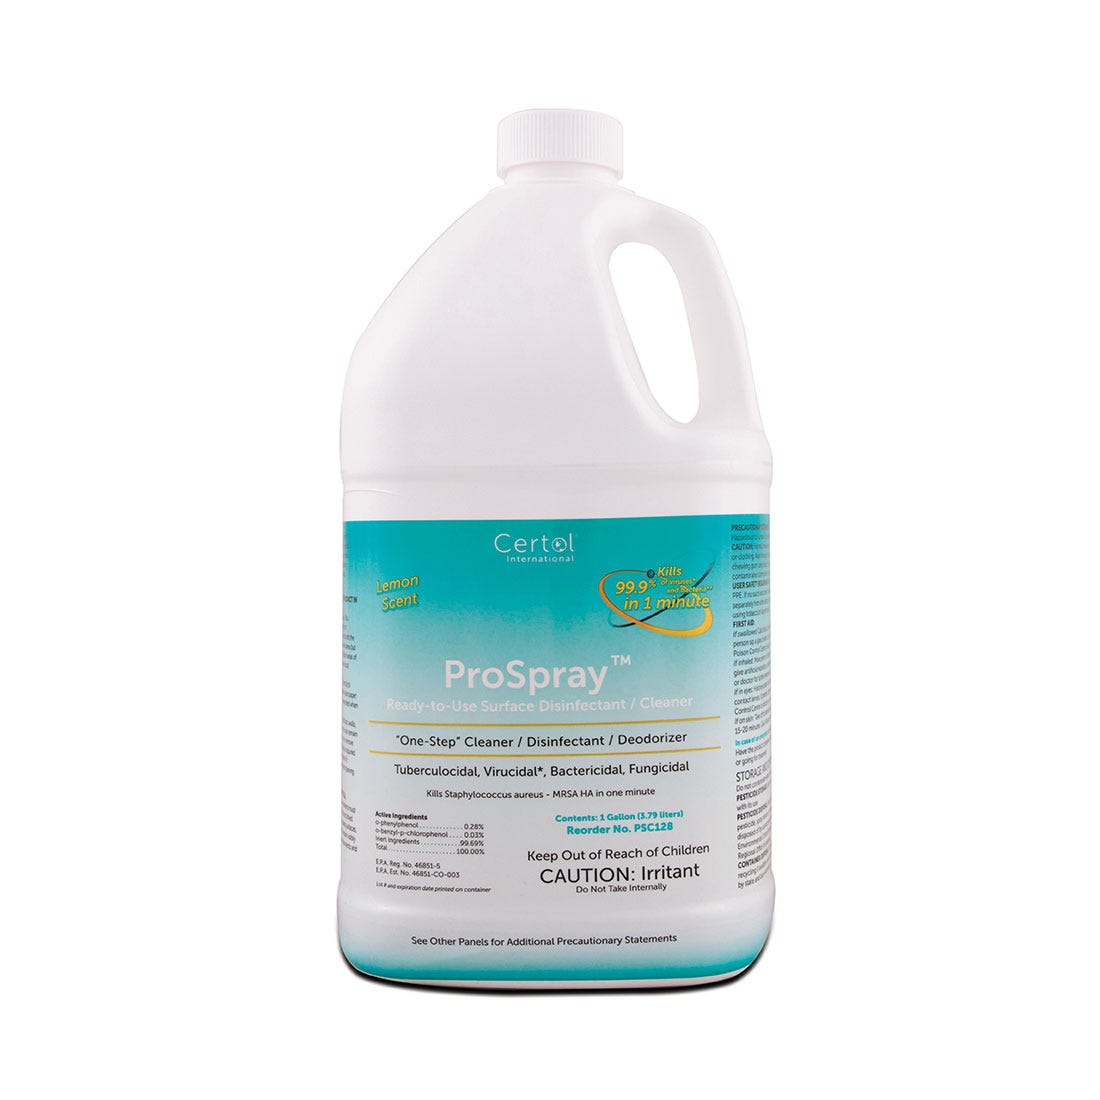 ProSpray™ Ready-to-Use Surface Disinfectant Cleaner, 1 Gallon